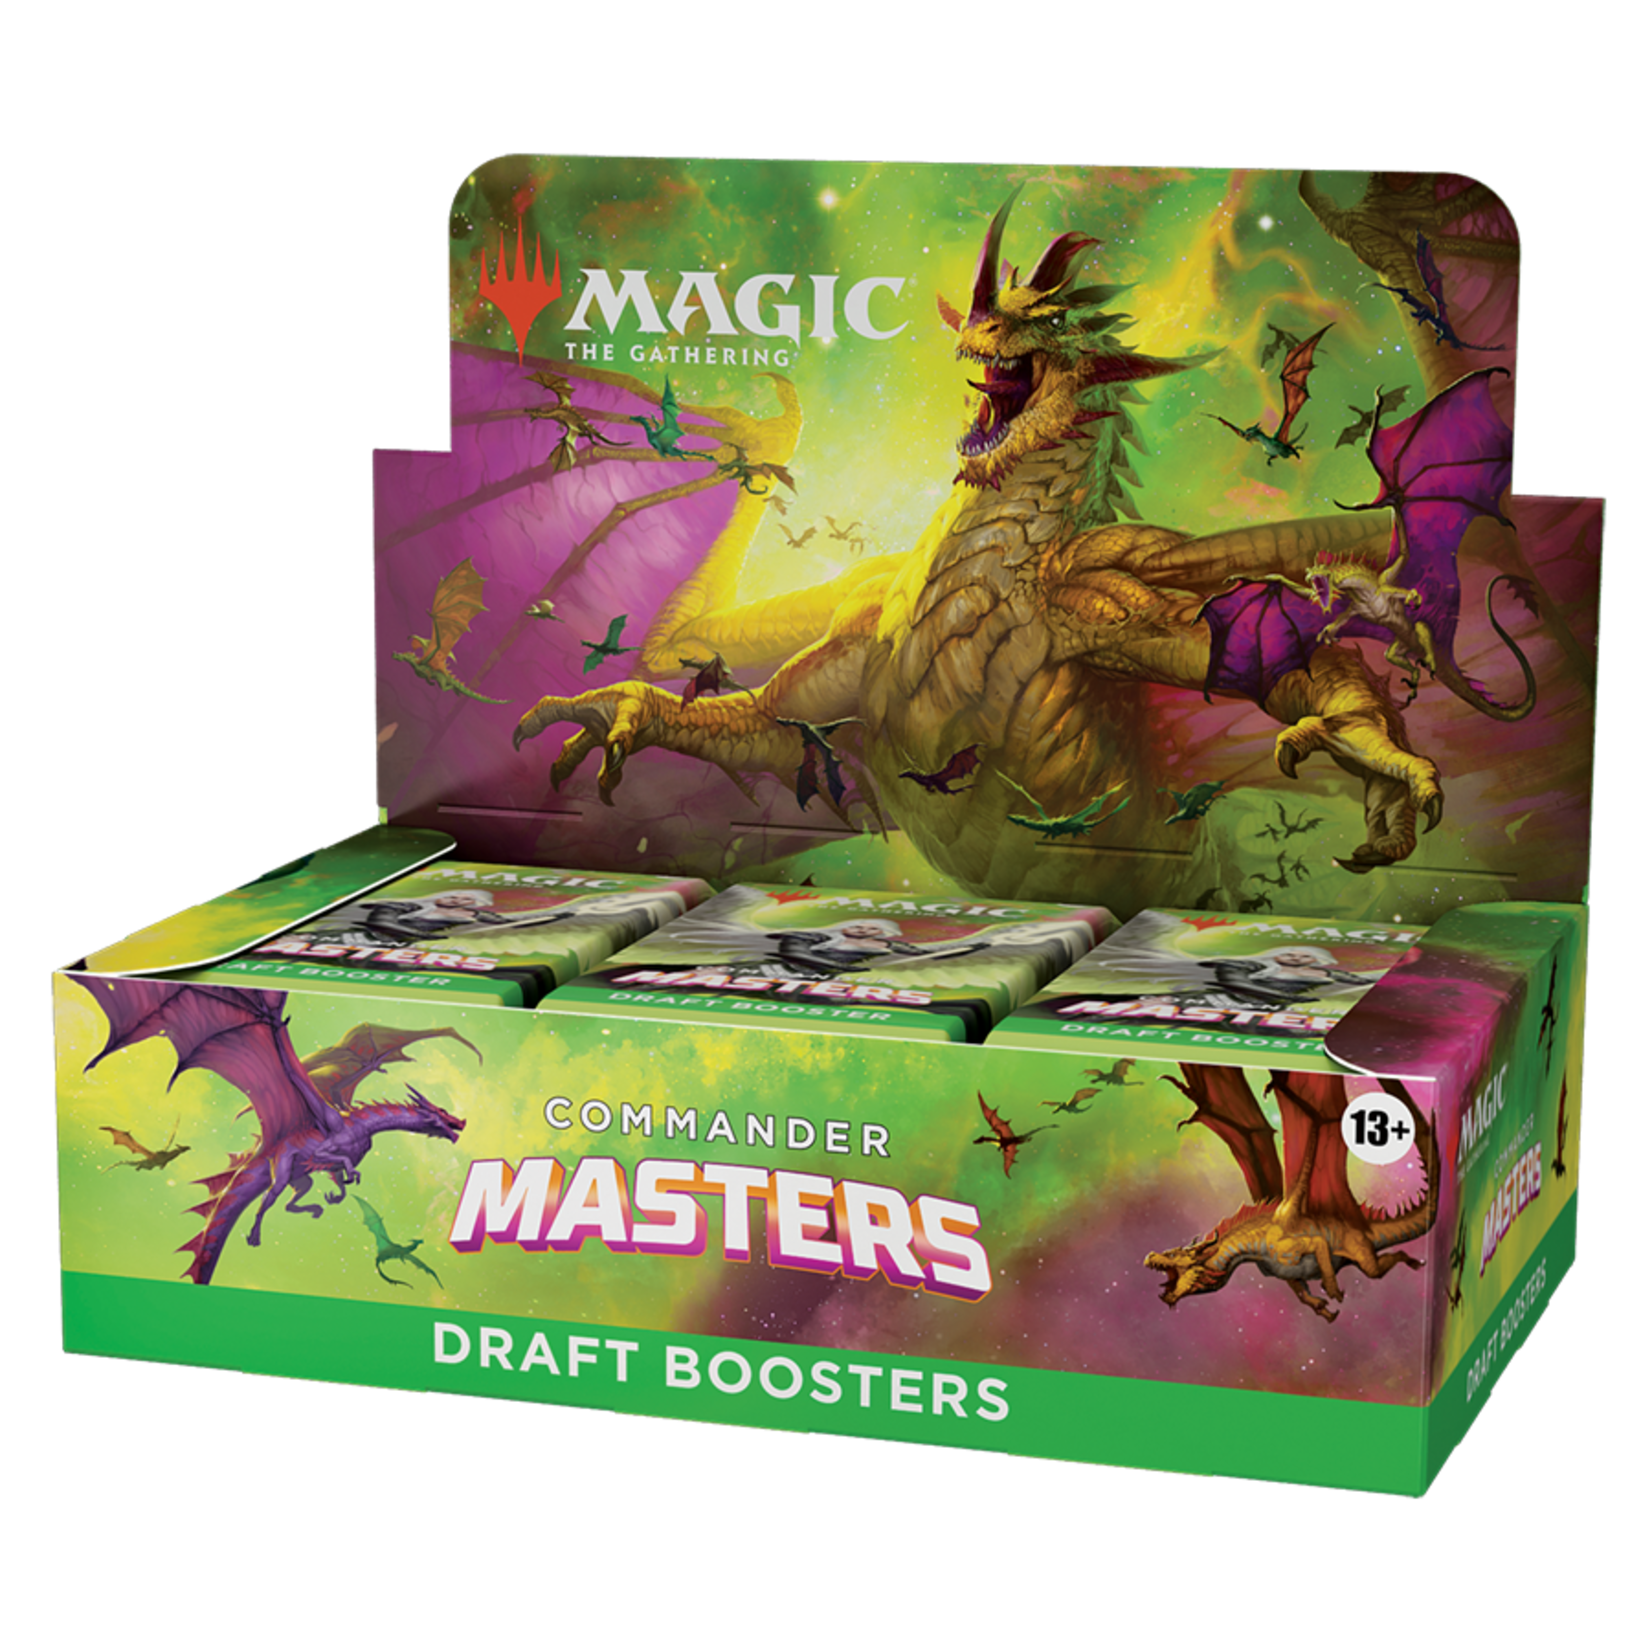 Magic: The Gathering Magic: The Gathering – Commander Masters Draft Booster Box